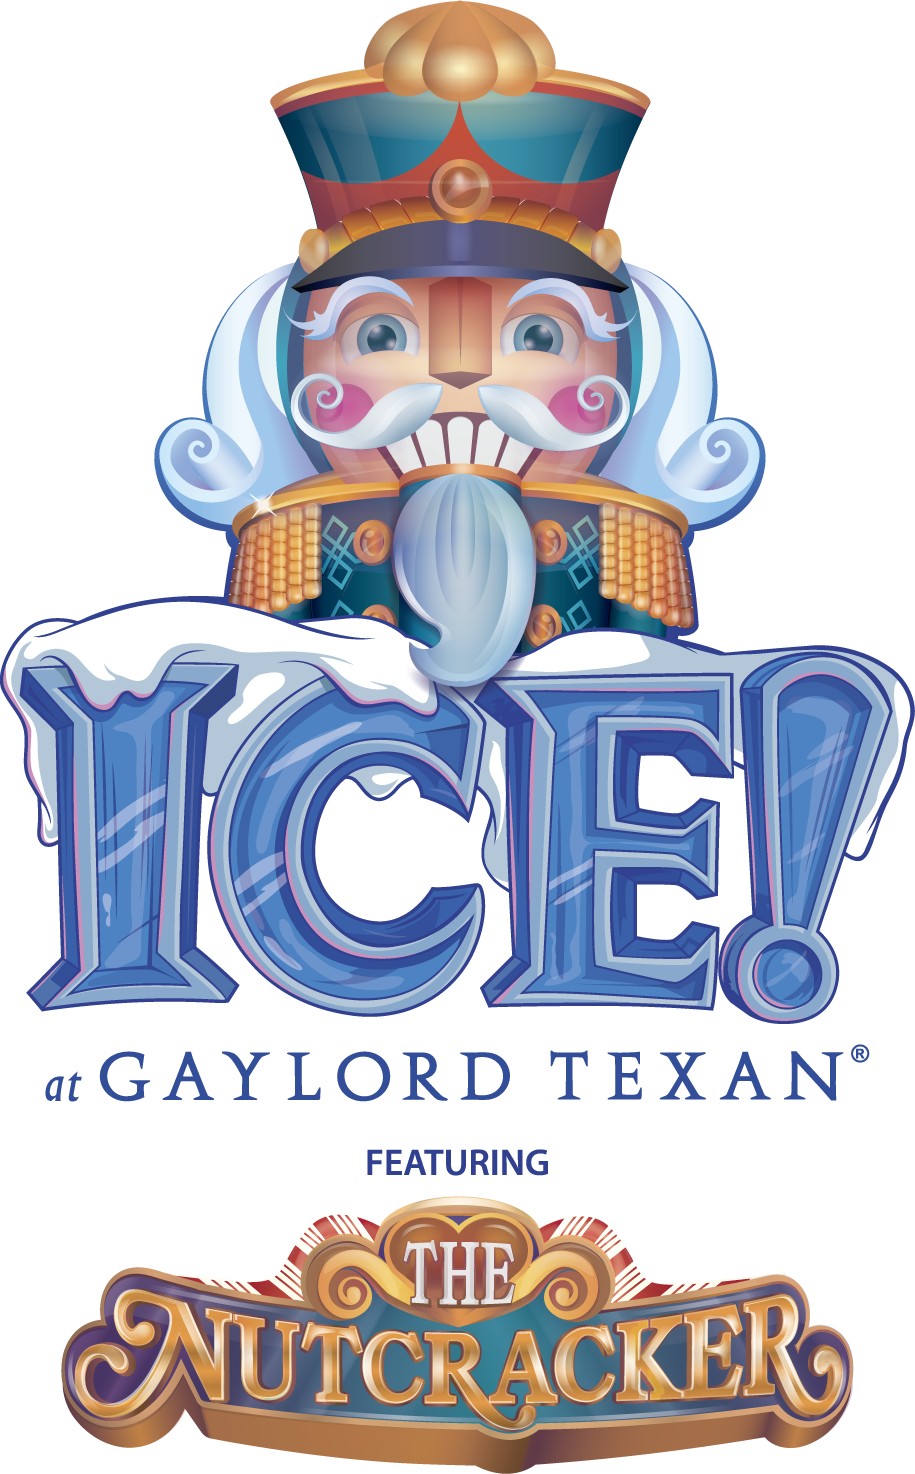 ICE! FEATURING "THE NUTCRACKER"!